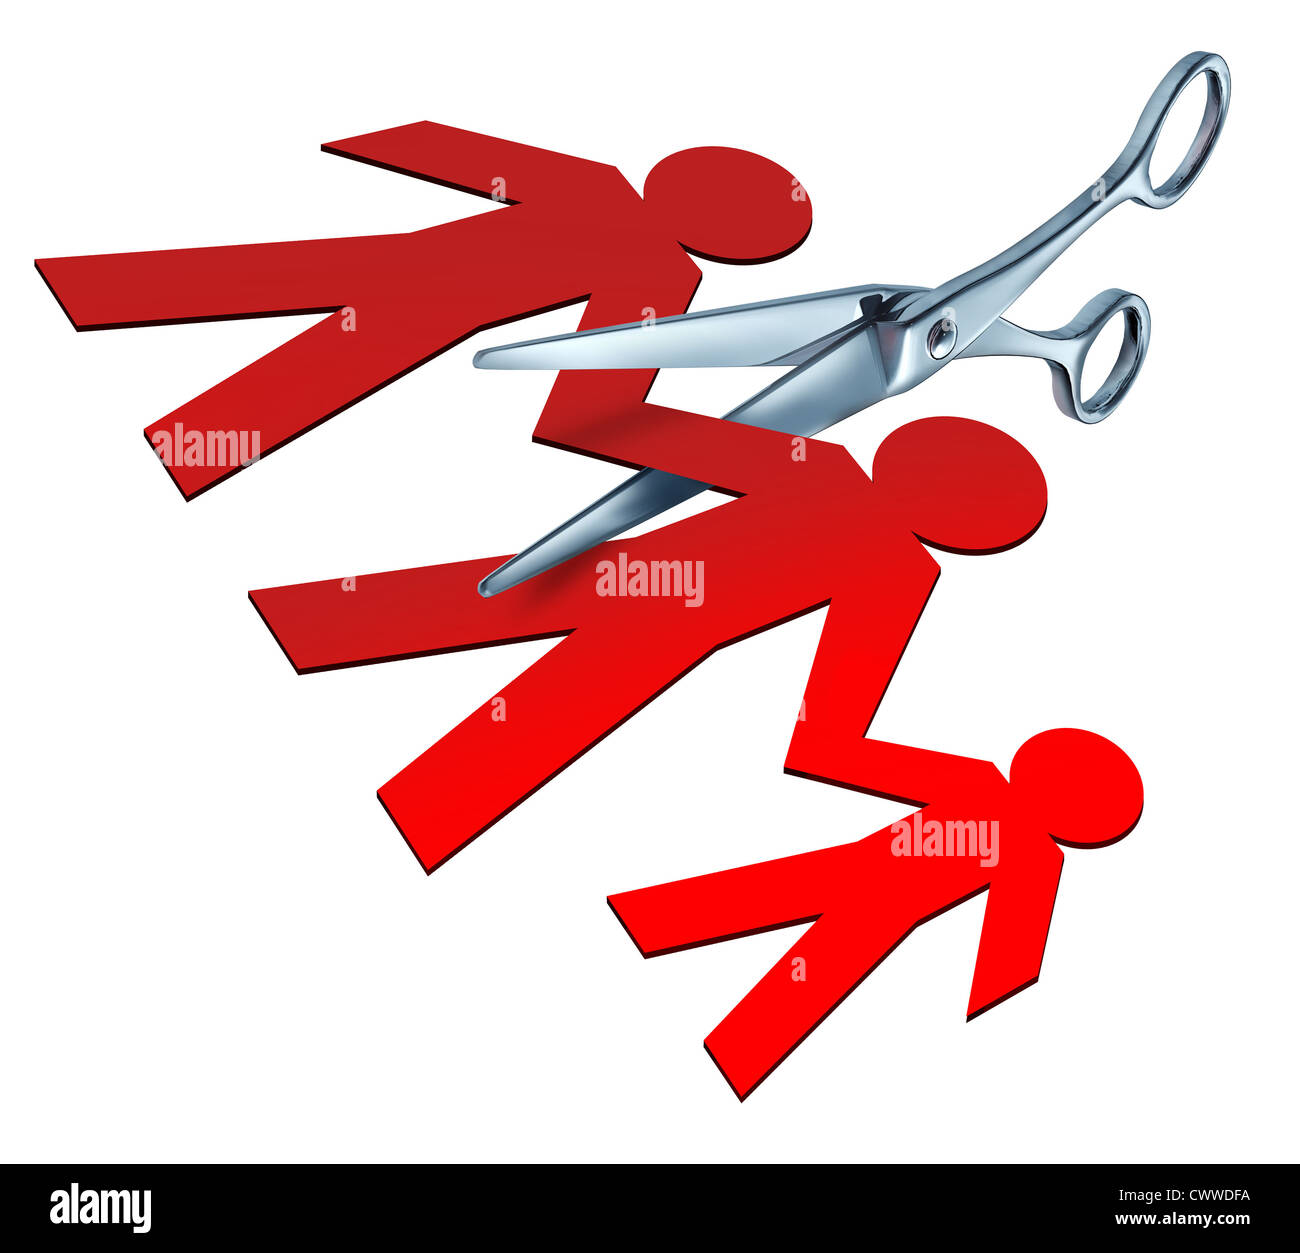 Broken family and child custody after a bitter divorce and separation represented by a pair of metal scissors cutting apart a family of red paper cut outs of a mother father and child showing the concept of division and alienation. Stock Photo